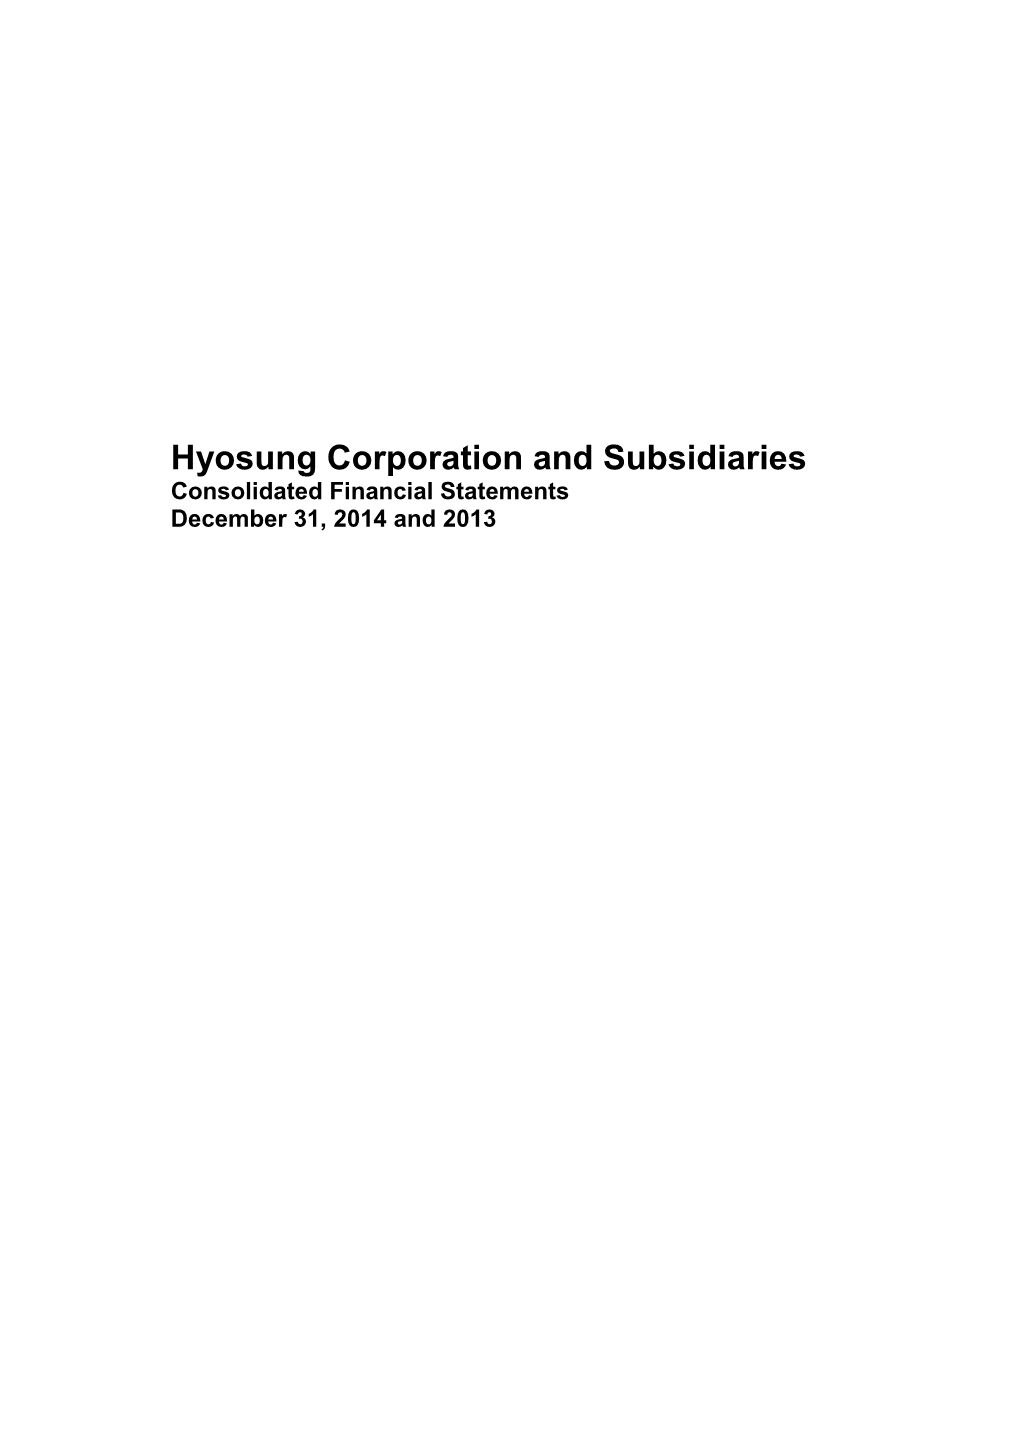 Hyosung Corporation and Subsidiaries